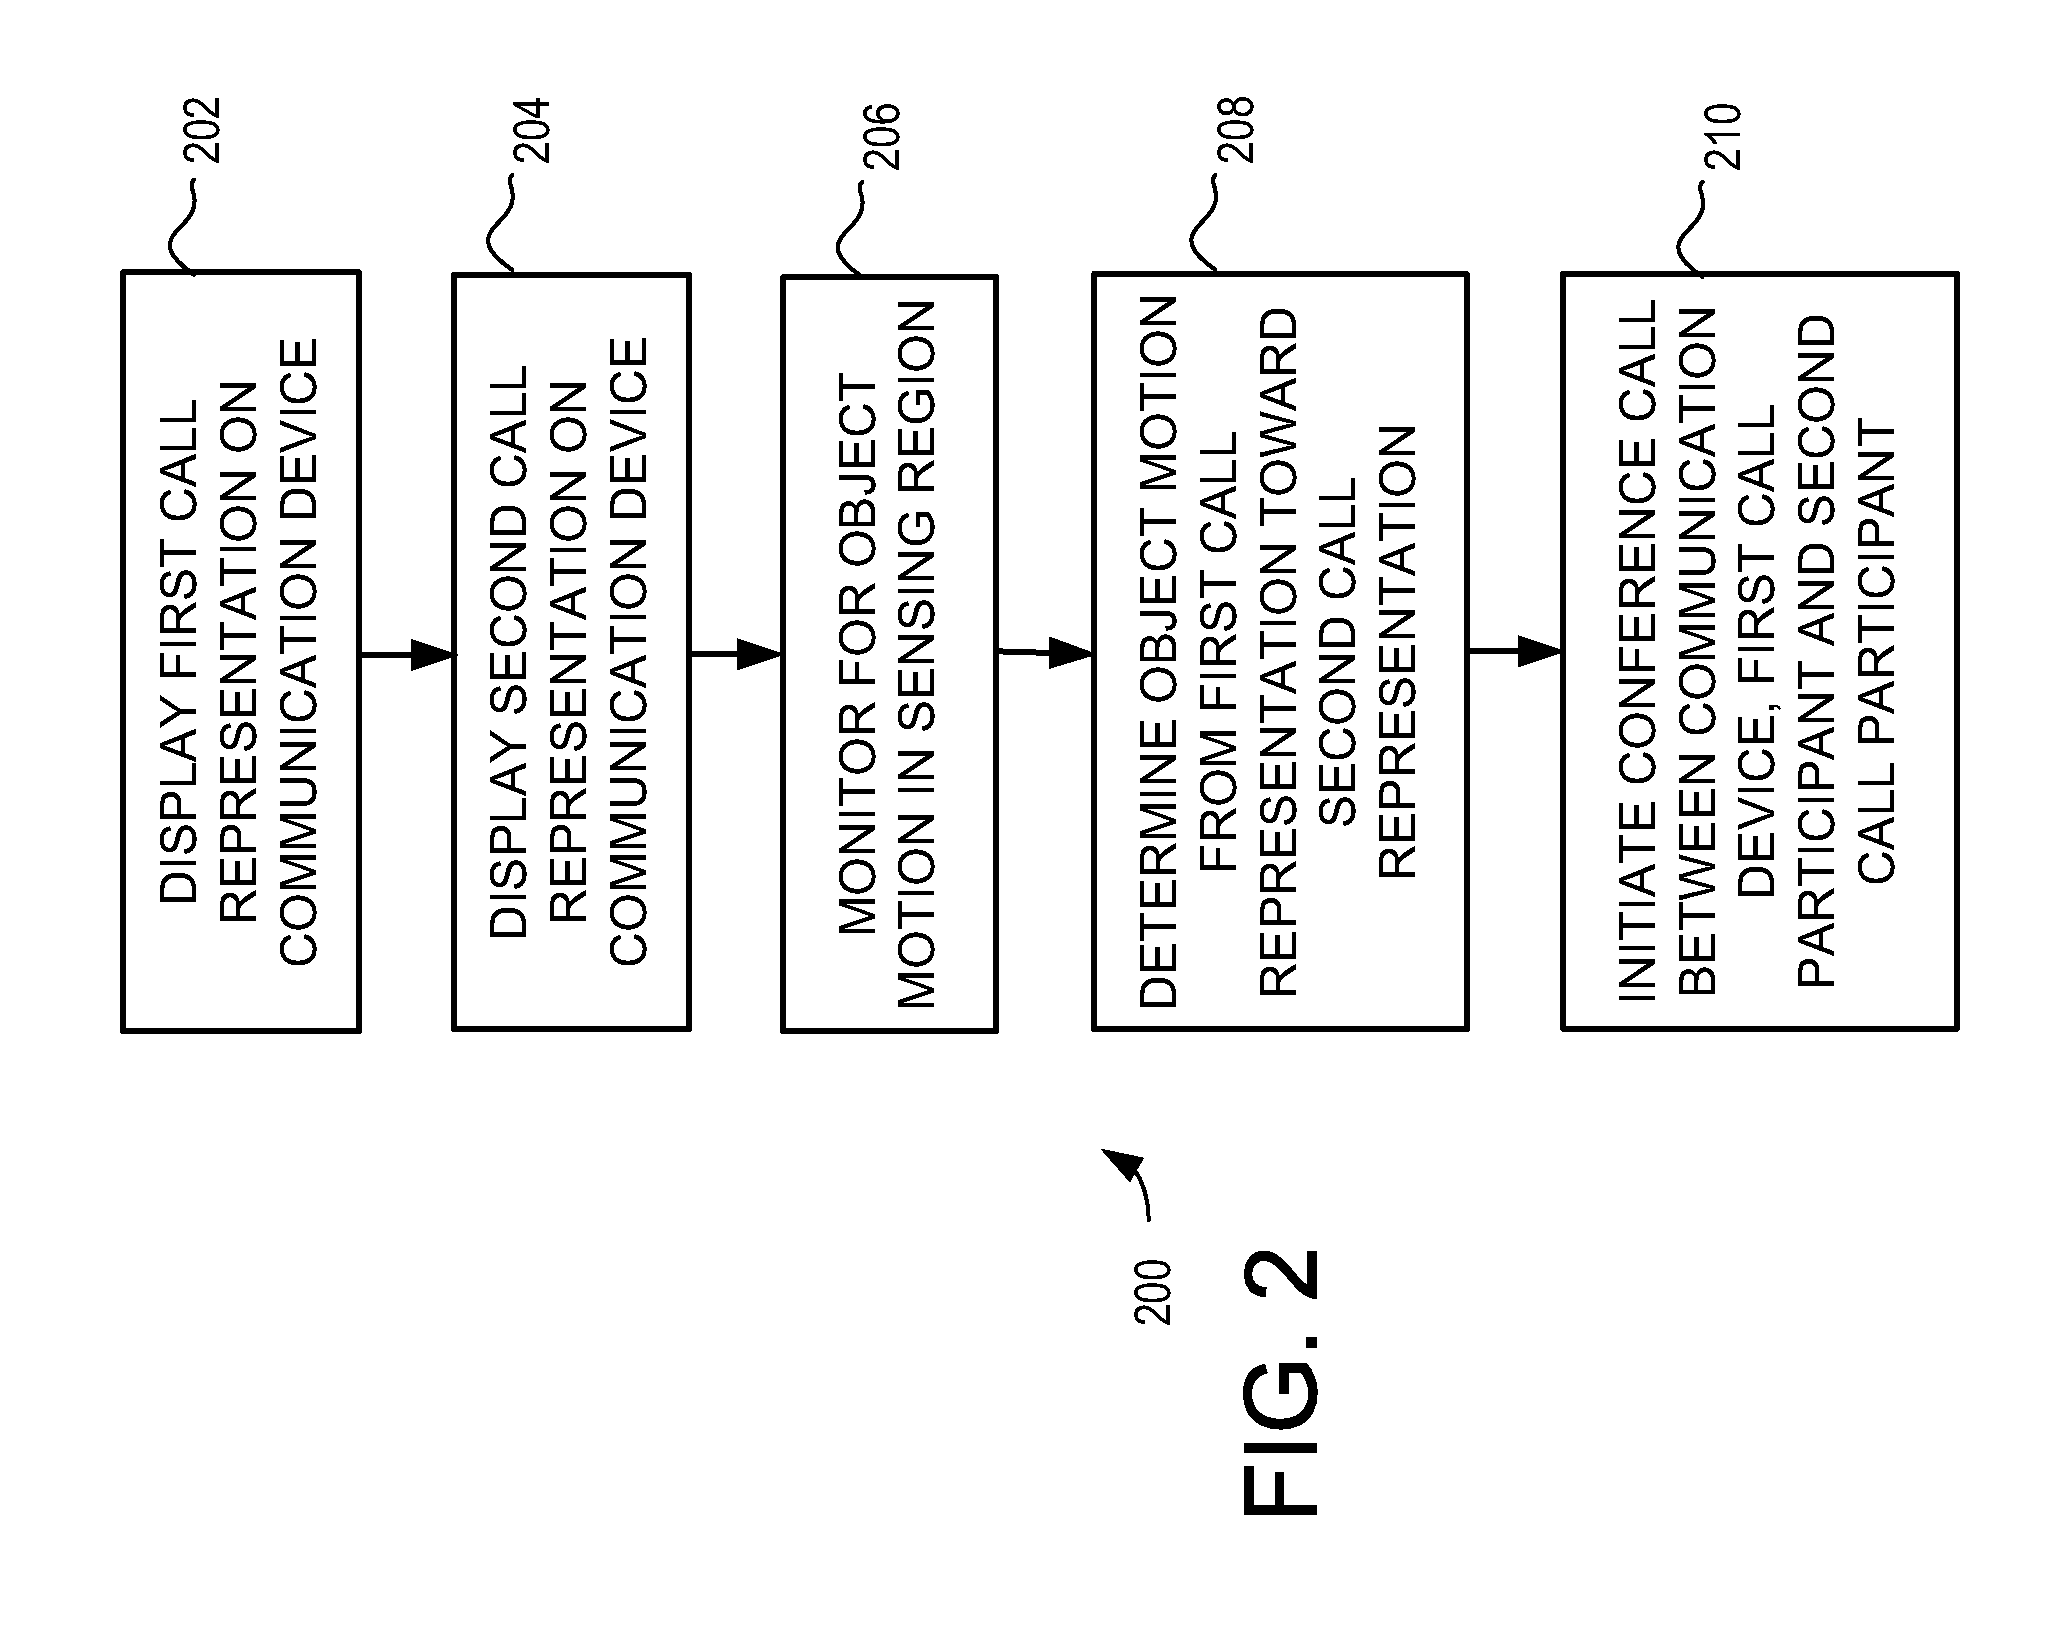 Handheld communication device and method for conference call initiation